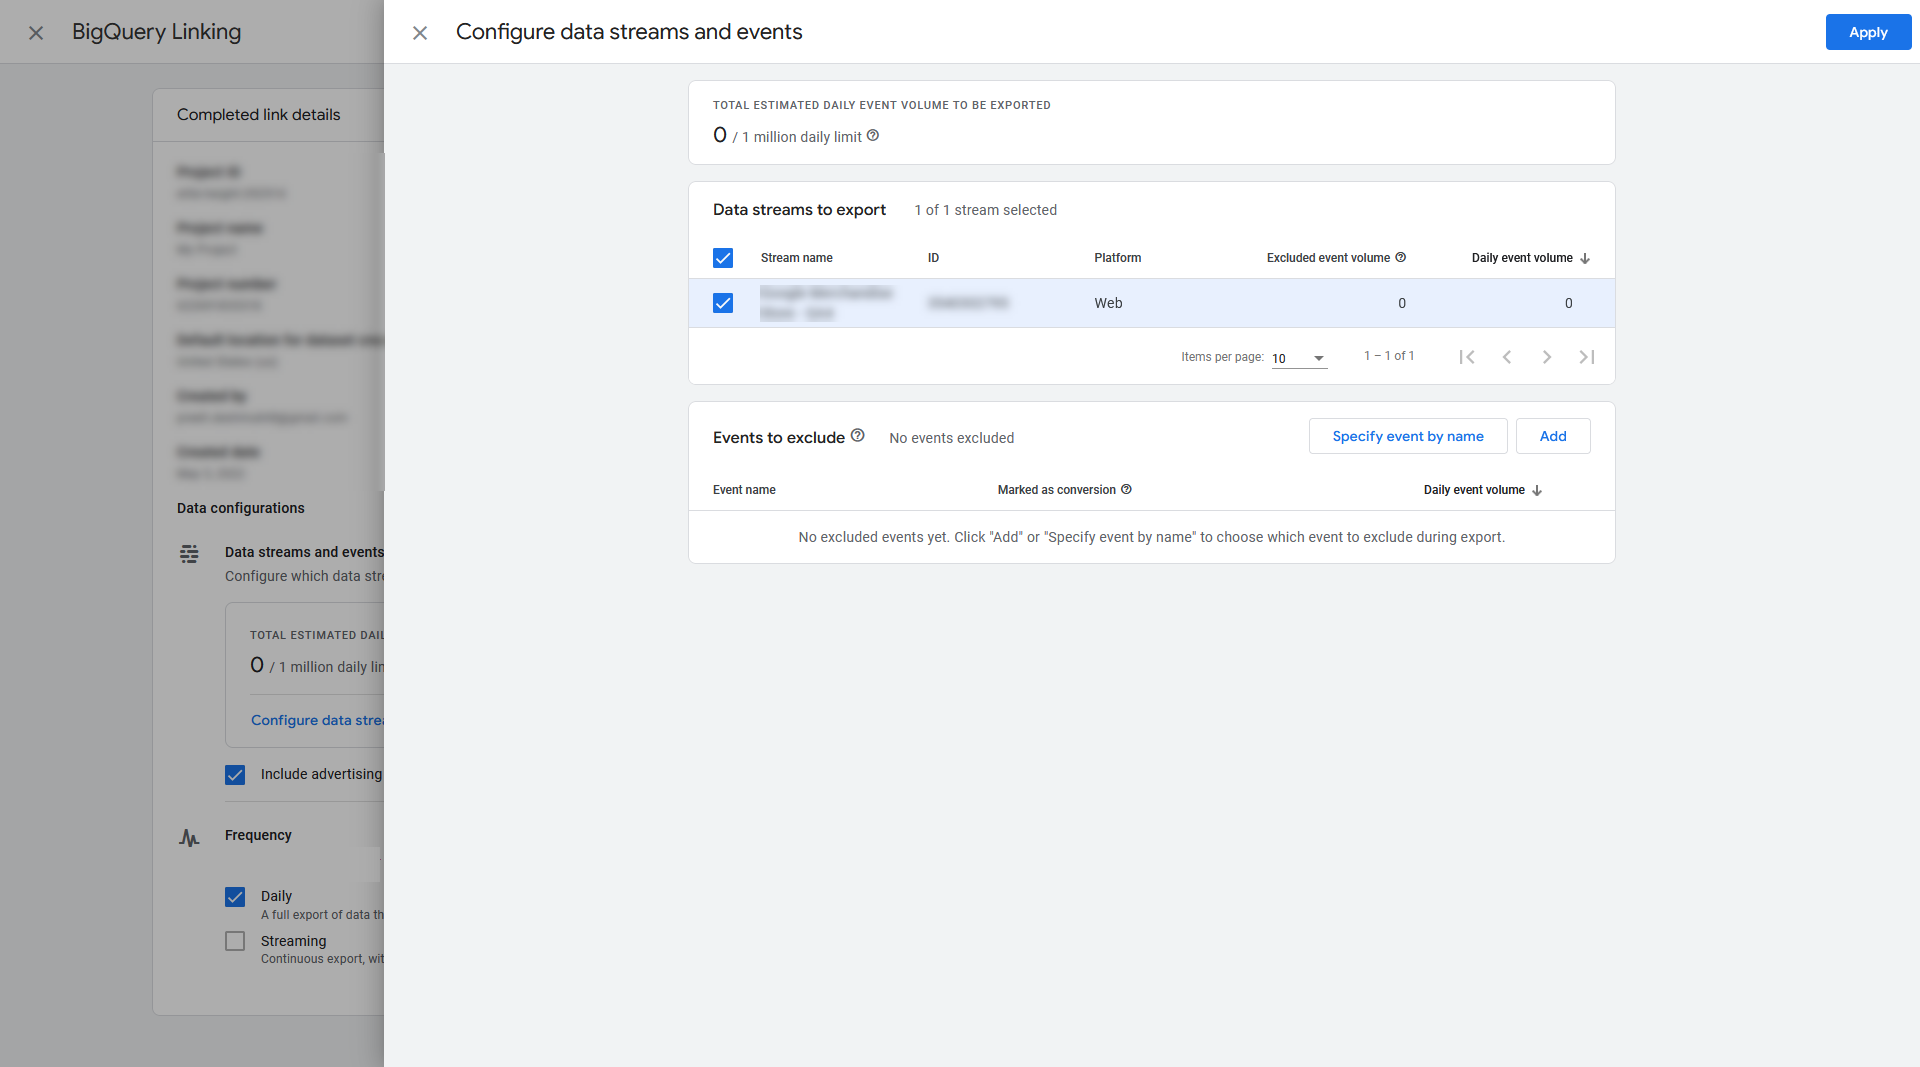 Step 22.7 Select ‘Configure data streams and events’